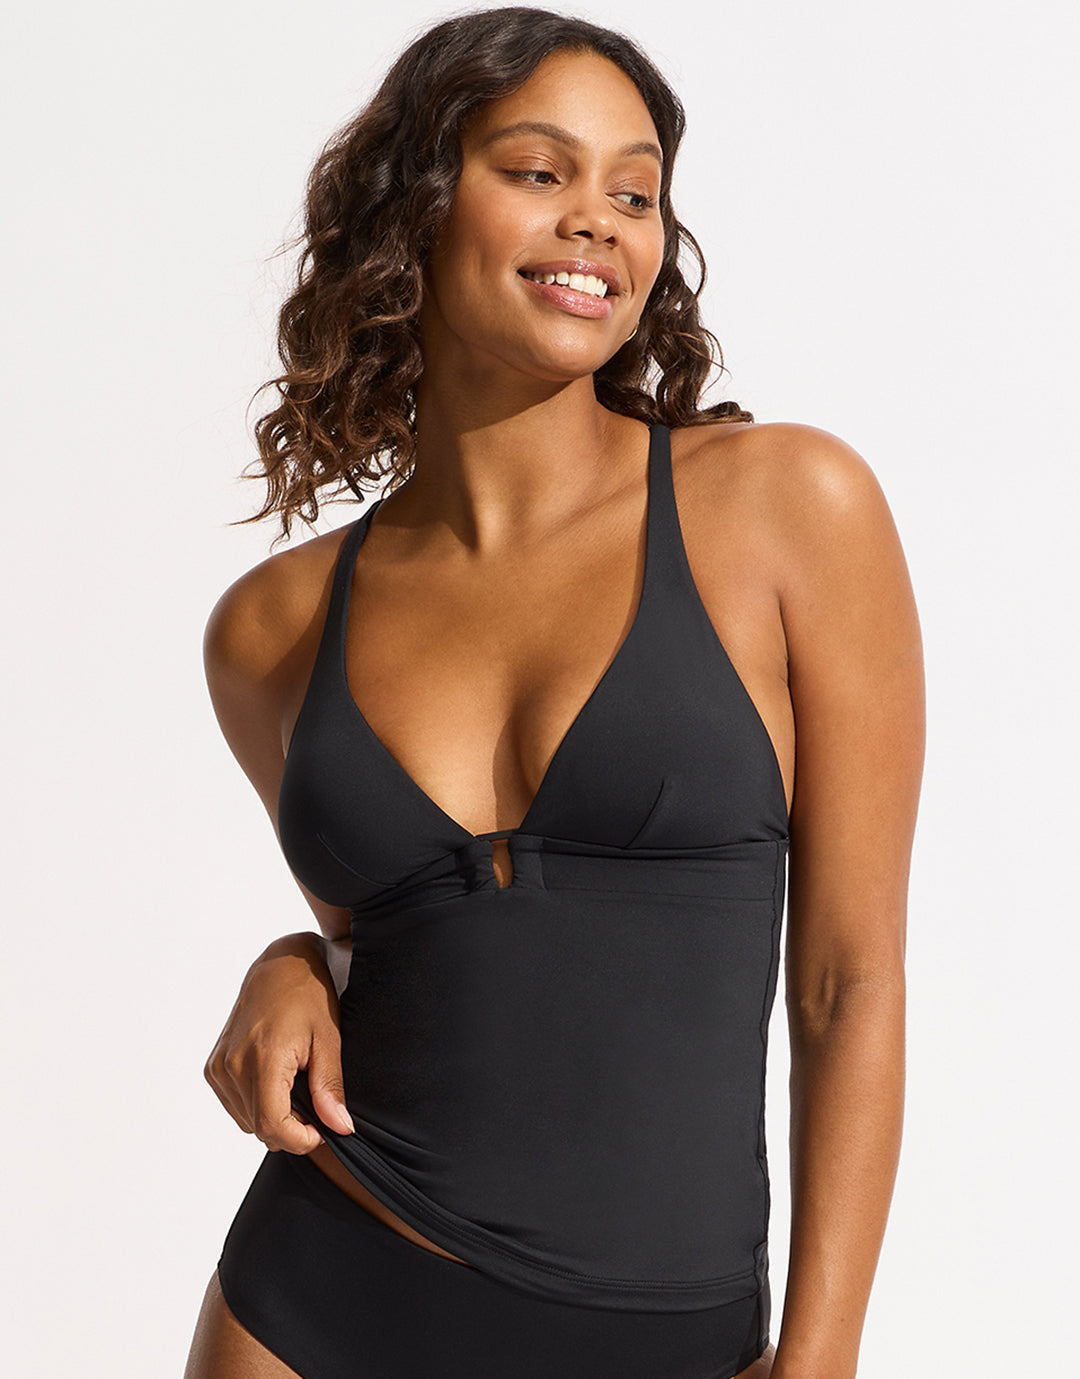 Collective Trim Front Tankini Top - Black - Simply Beach UK